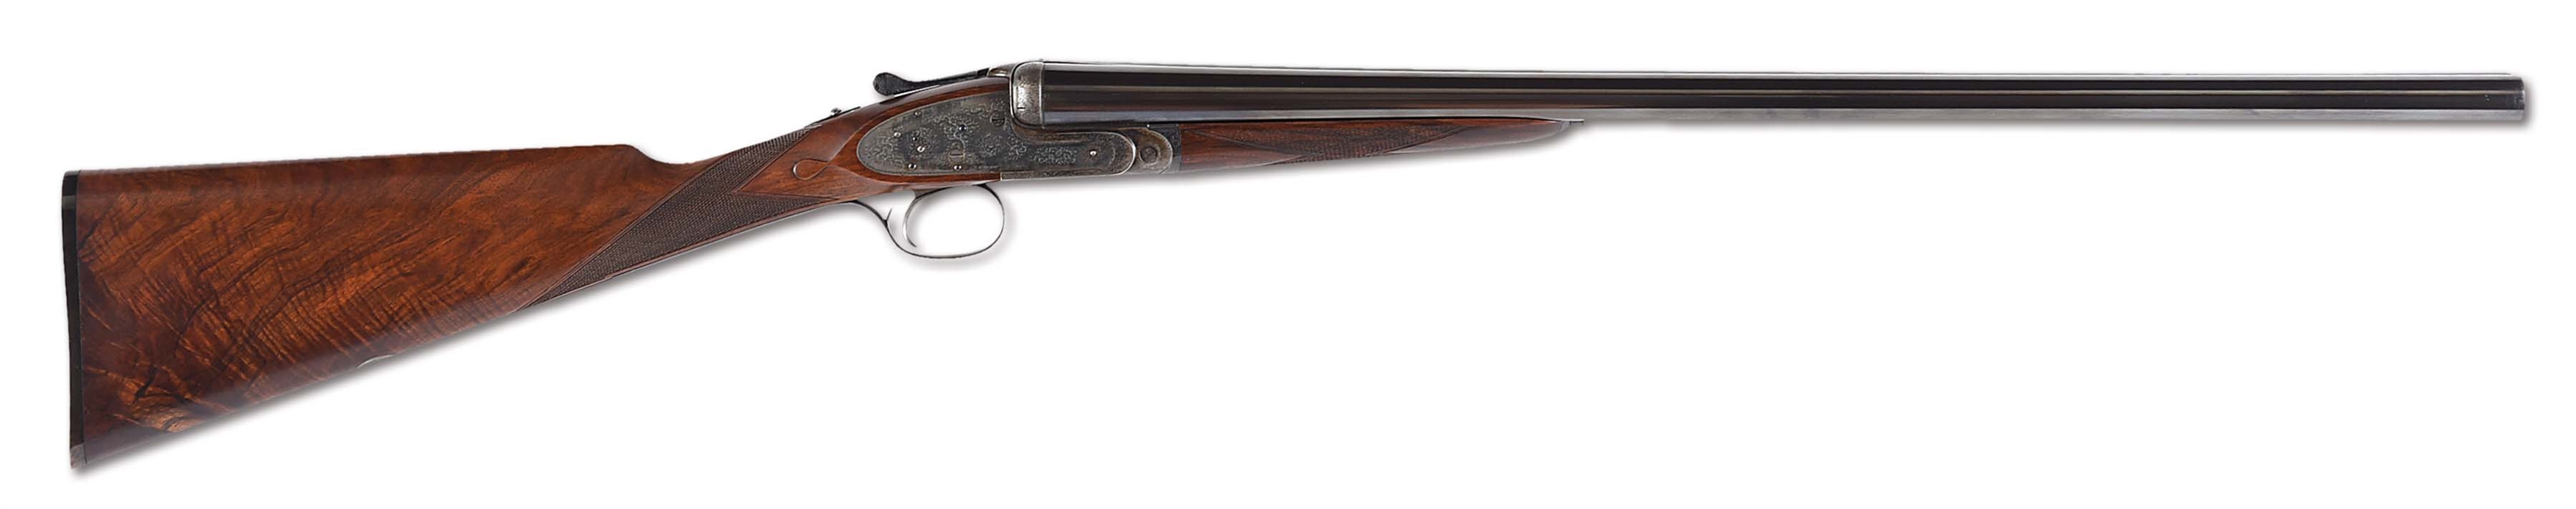 (C) EARLY POST WAR JAMES PURDEY SELF-OPENING SIDELOCK EJECTOR SINGLE TRIGGER GAME SHOTGUN WITH EXTRA BARRELS AND CASE